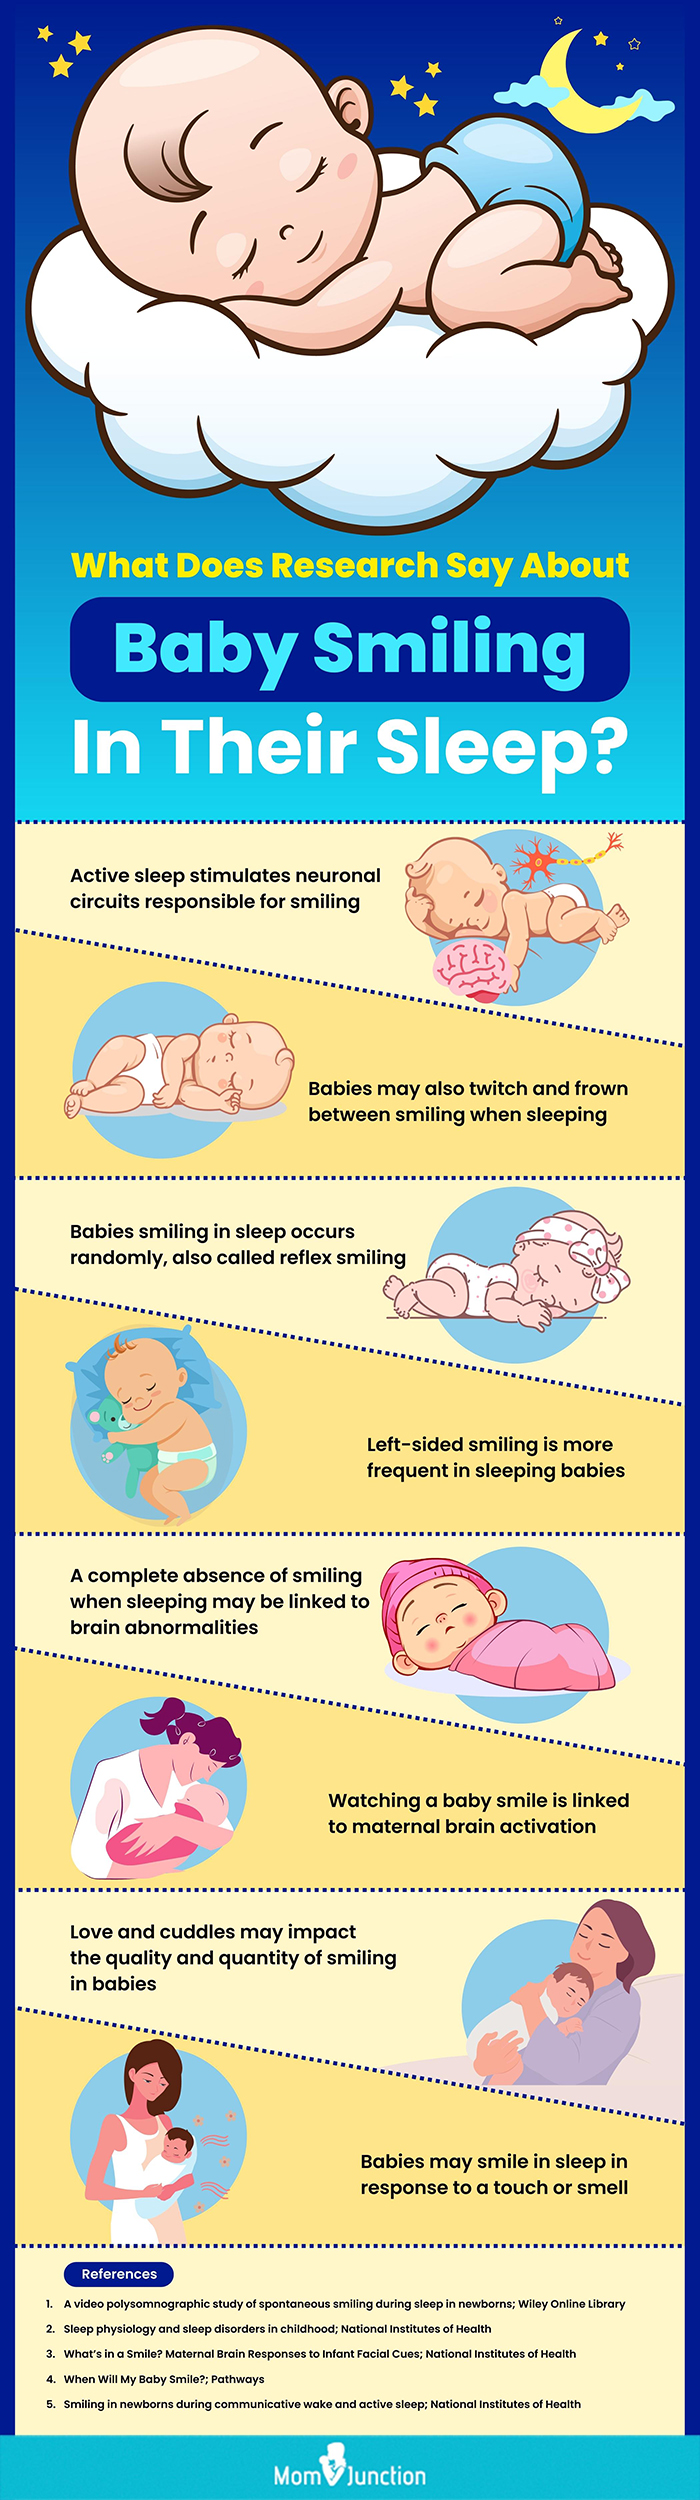 what does research say about baby smiling in their sleep(infographic)